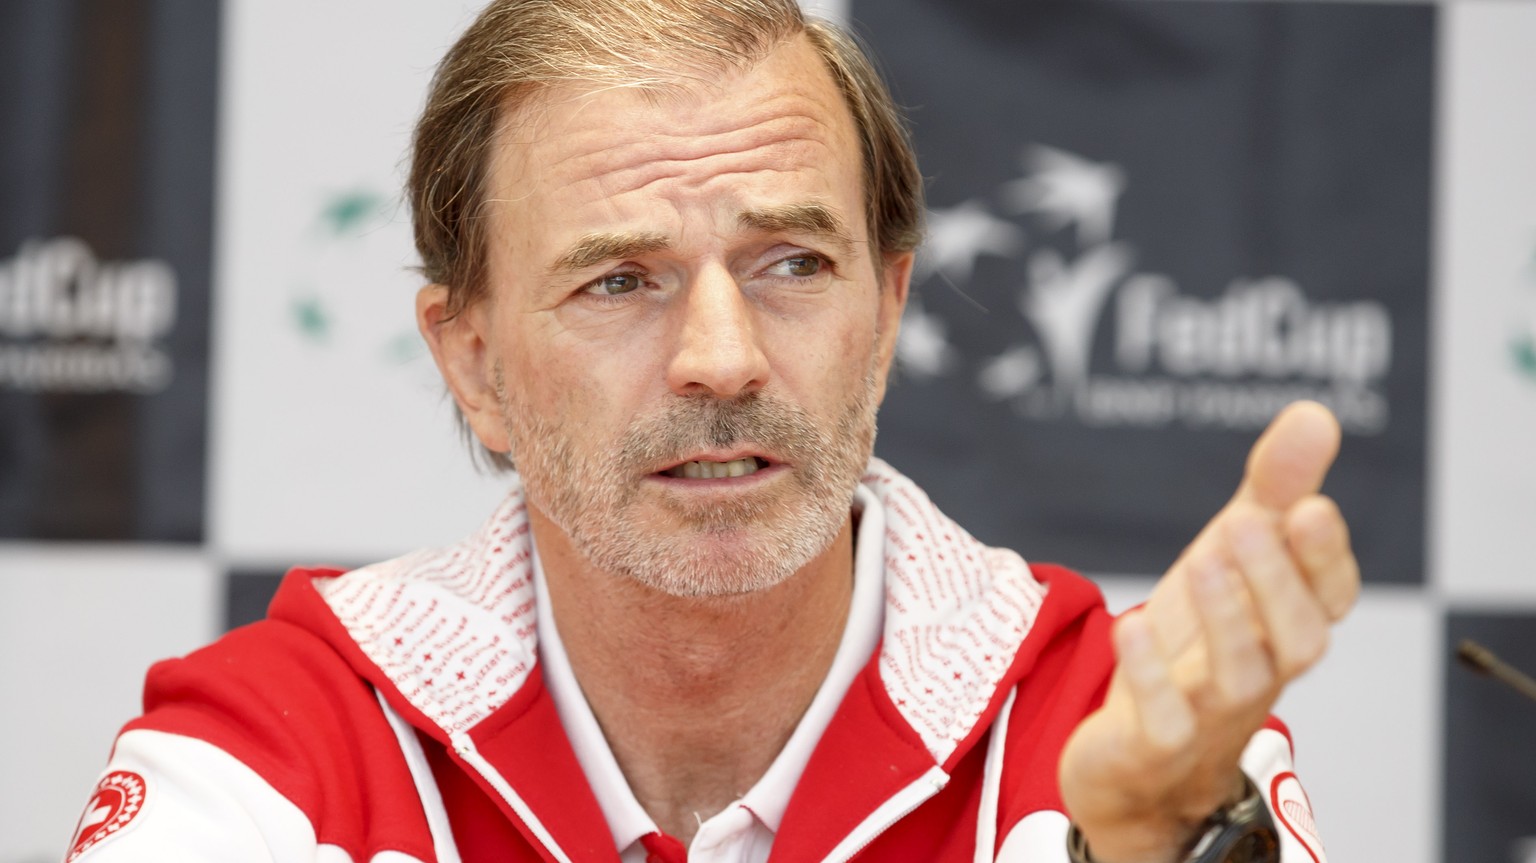 Swiss Fed Cup Team captain Heinz Guenthardt speaks to the media, after the drawing of the Fed Cup World Group Semifinal match between Belarus and Switzerland, in Minsk, Belarus, Friday, April 21, 2017 ...